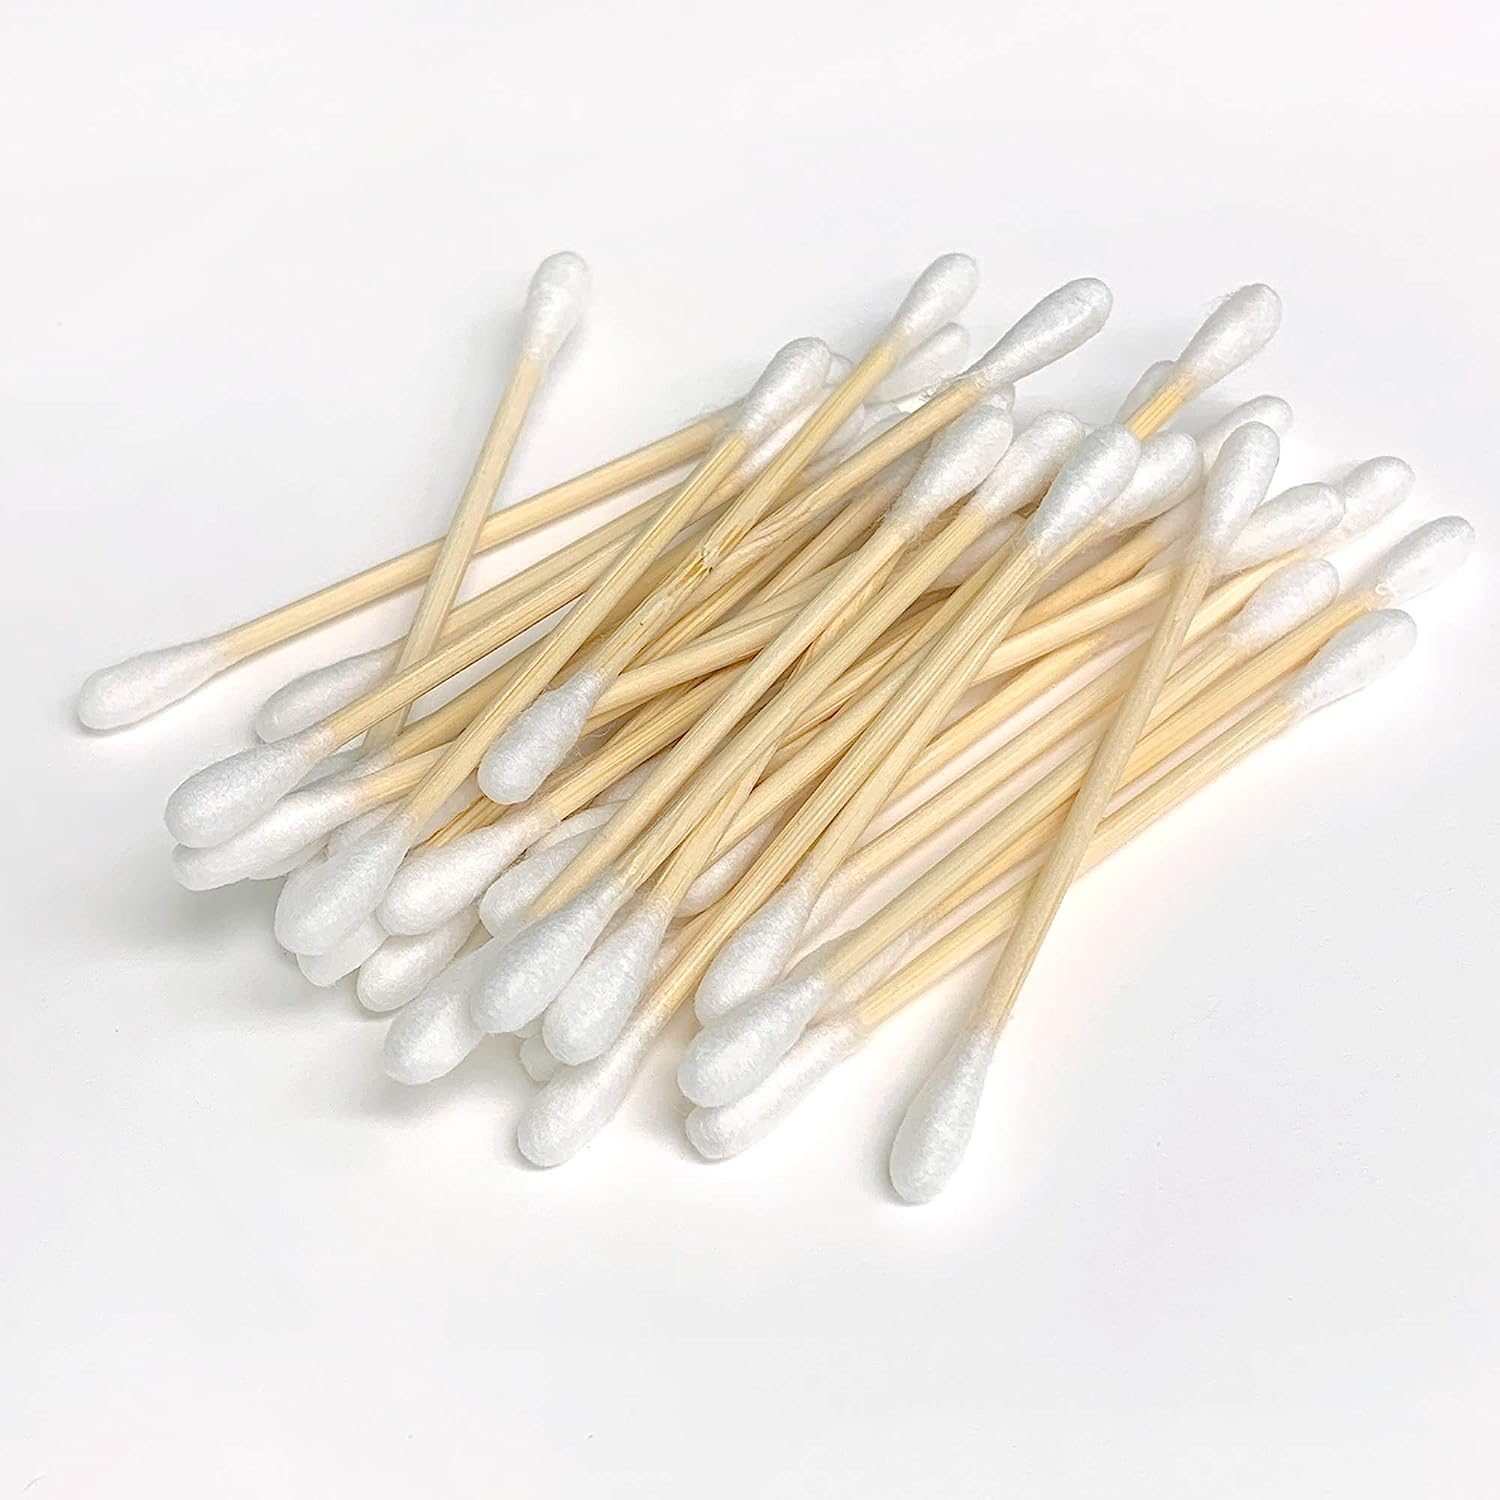 Cotton Ear Buds - Home Essentials Store Retail